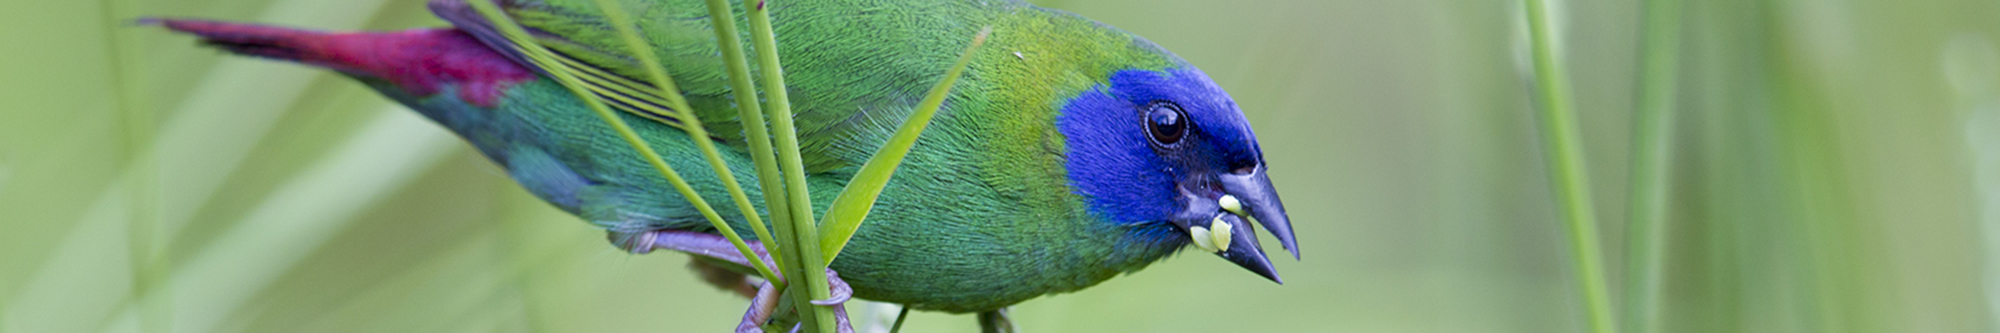 Blue-faced Parrot Finch (Male).